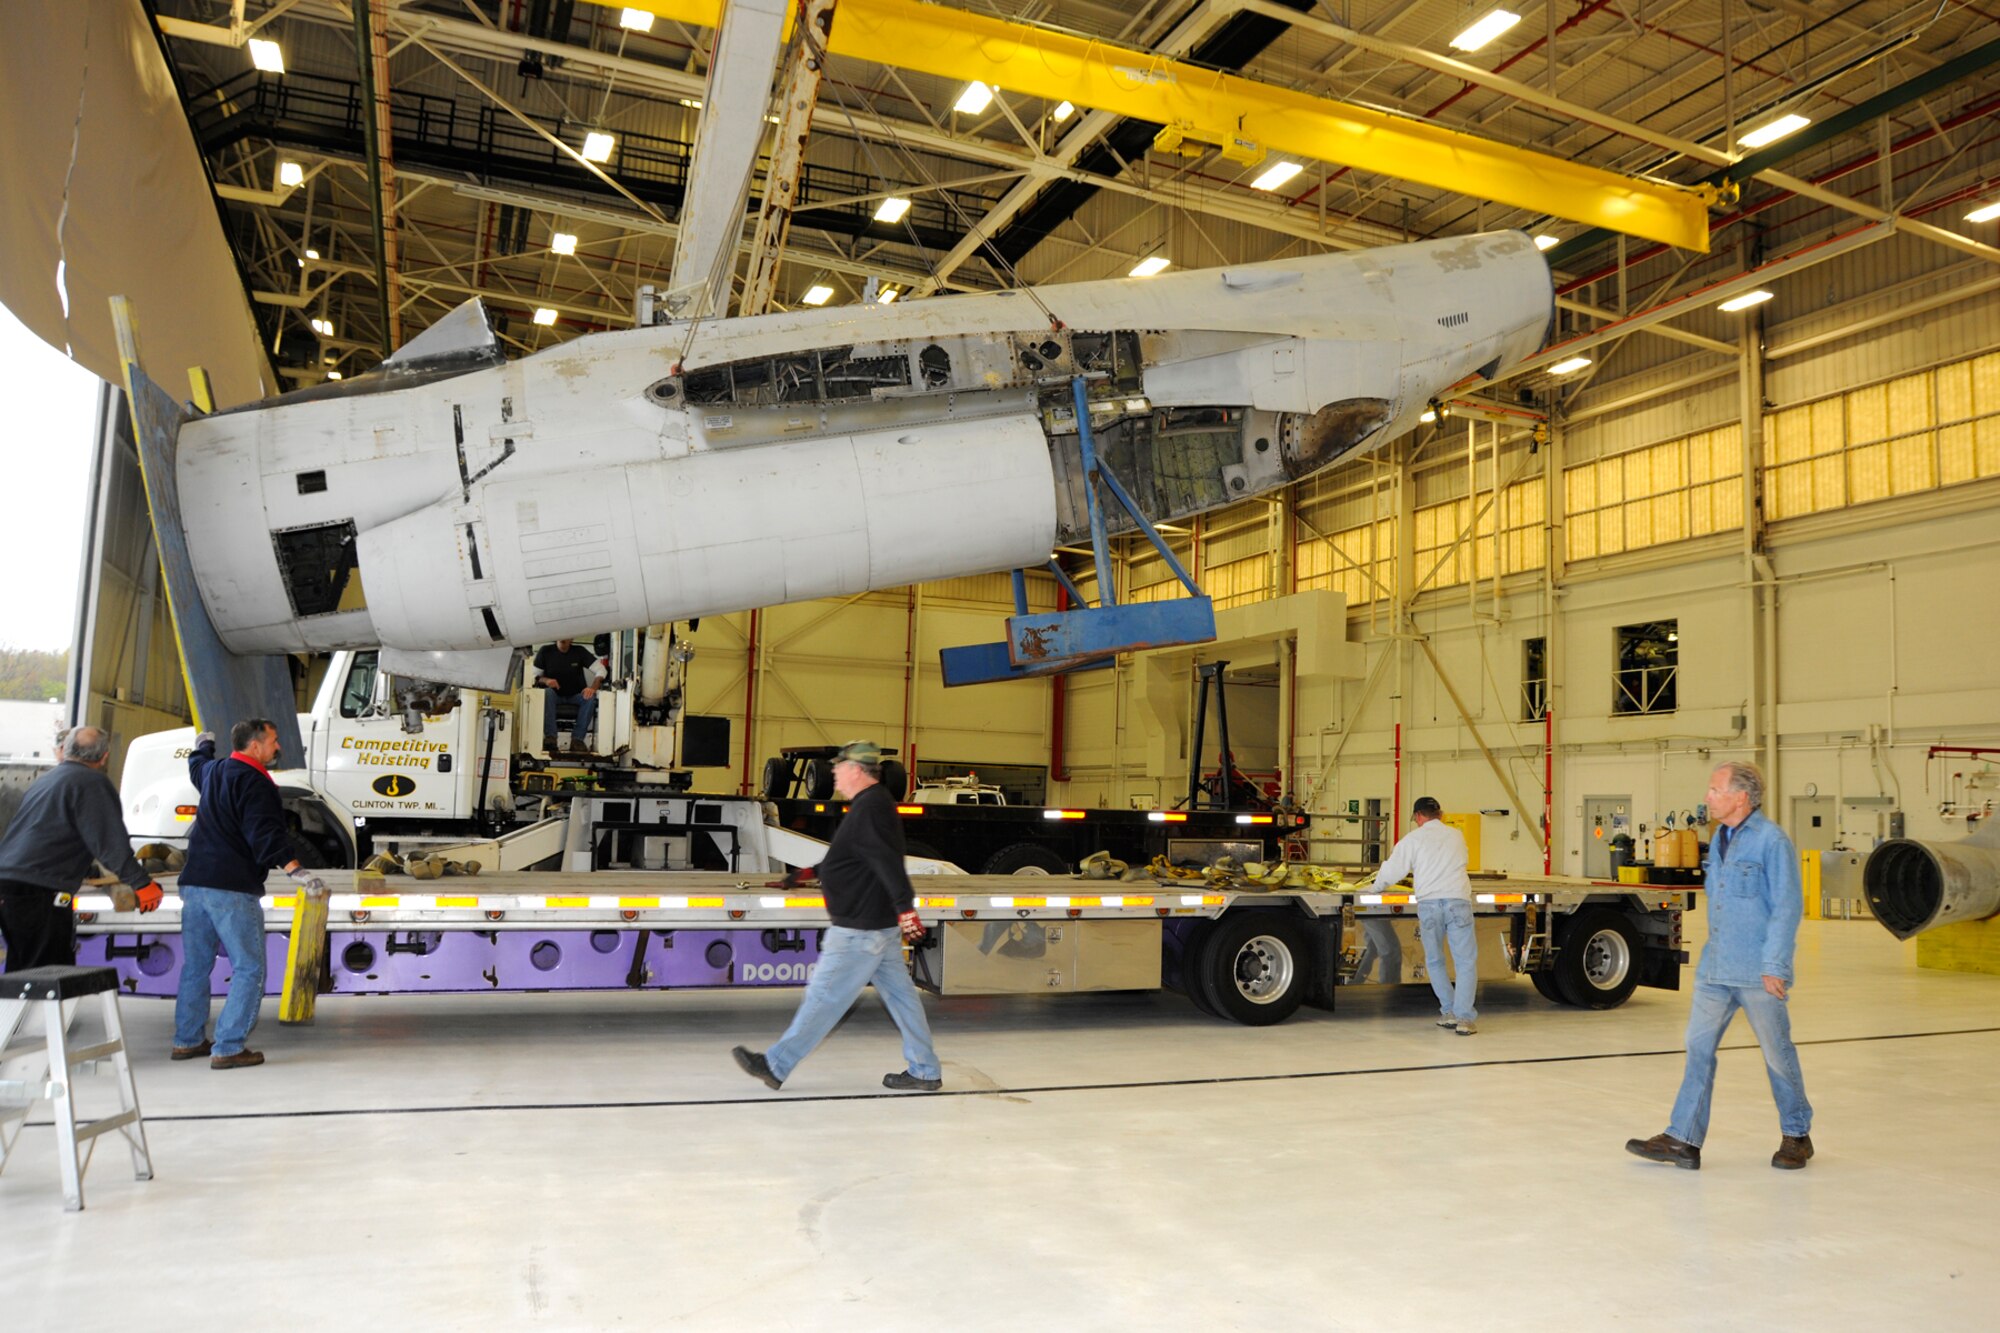 Volunteers from the Selfridge Military Air Museum watch as a crane lifts the fuselage of an F-89 Scorpion off a flatbed truck into an aircraft hangar at Selfridge Air National Guard Base, Mich., April 16, 2012. Once finished, museum officials believe they will have the only restored F-89 “C” model on display in the country, possibly the world. (U.S. Air Force photo by SSgt. Rachel Barton)